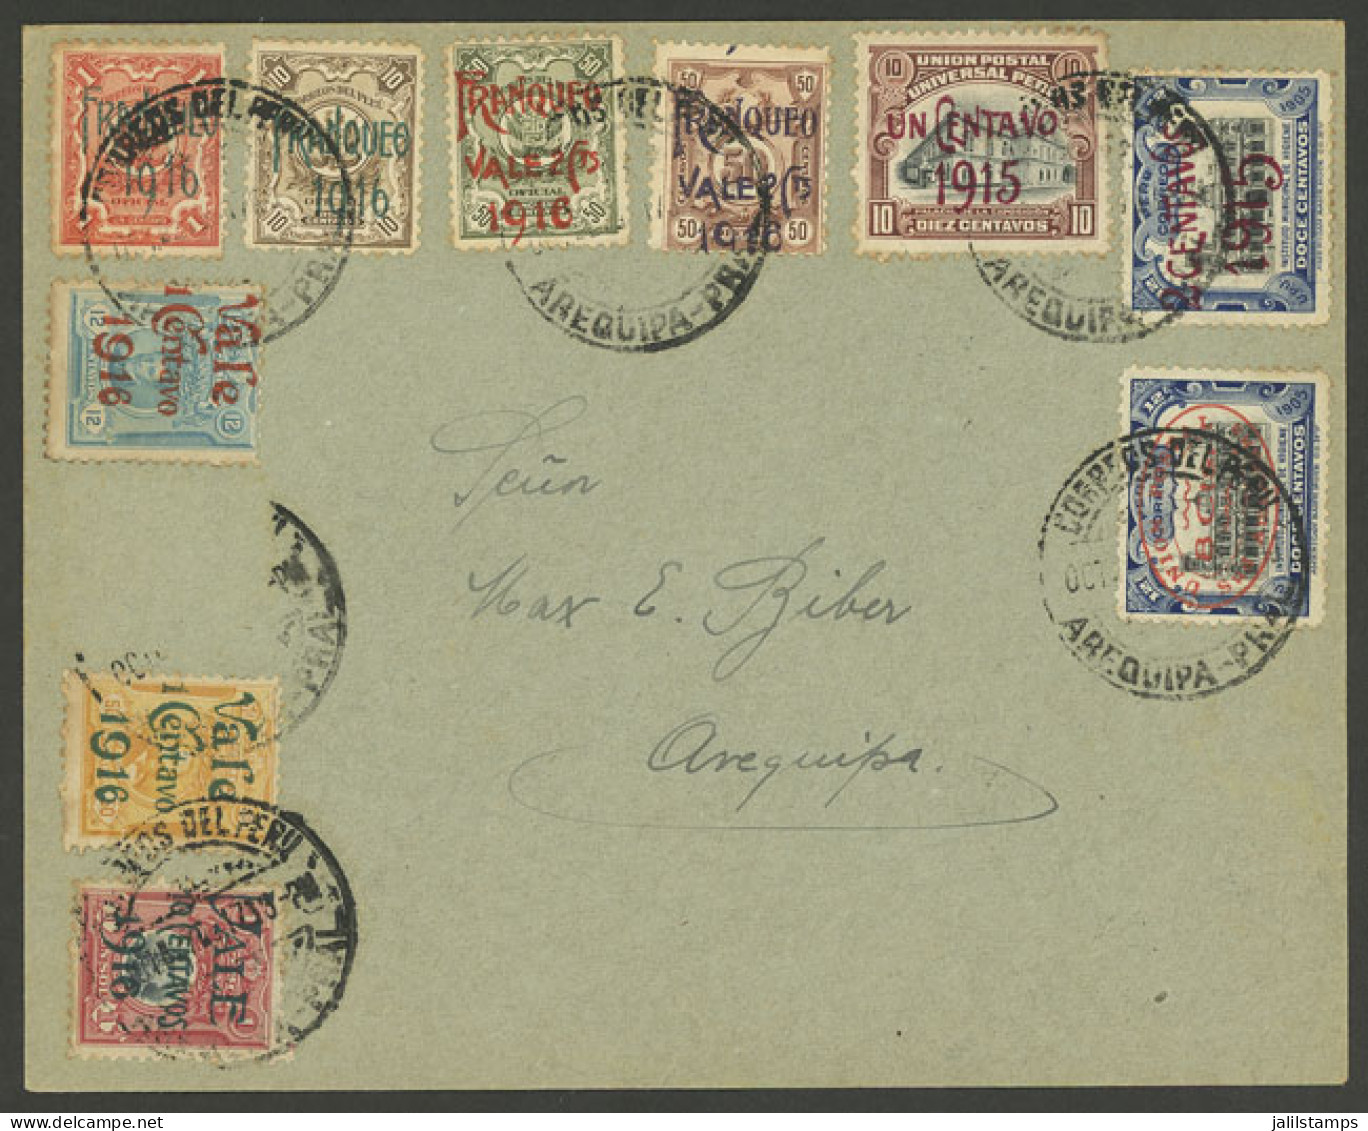 PERU: Cover Used In Arequipa In OC/1917 With Multicolor Postage Of 10 Overprinted Stamps, VF Quality! - Pérou